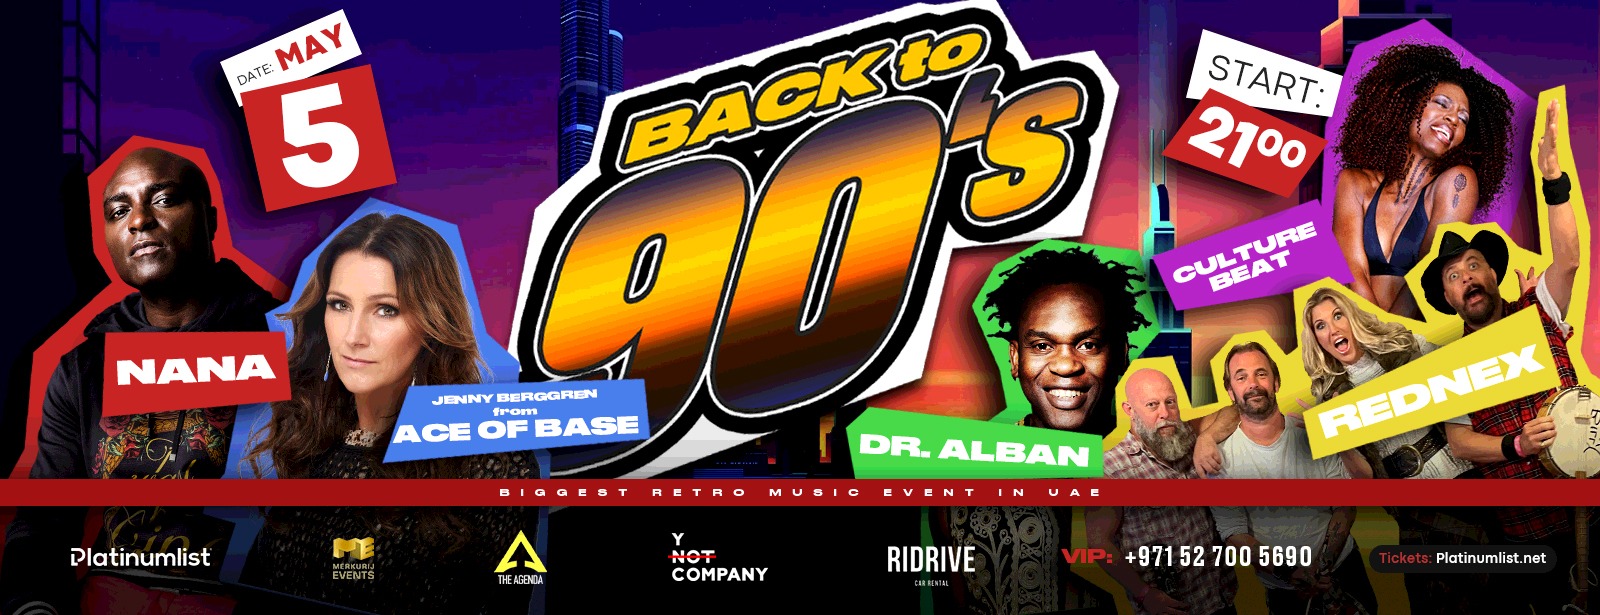 Back to the 90s – Dr.Alban, Jenny from ACE OF BASE and more live in Dubai - Coming Soon in UAE